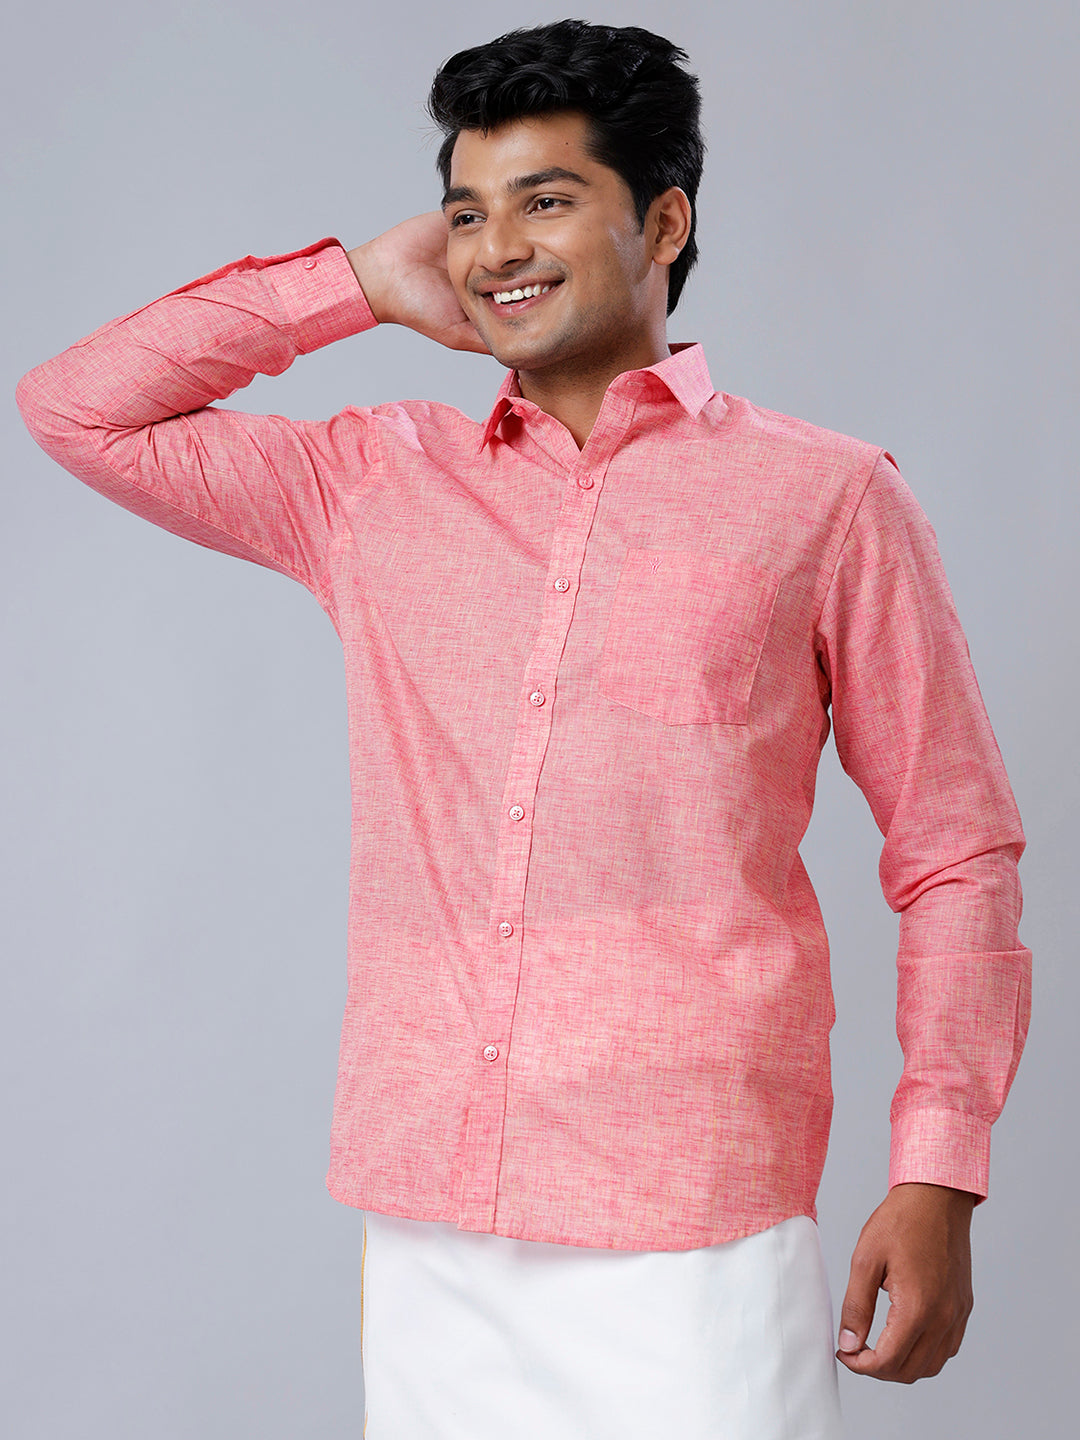 Mens Formal Shirt Full Sleeves Pink T39 TO1-Front view